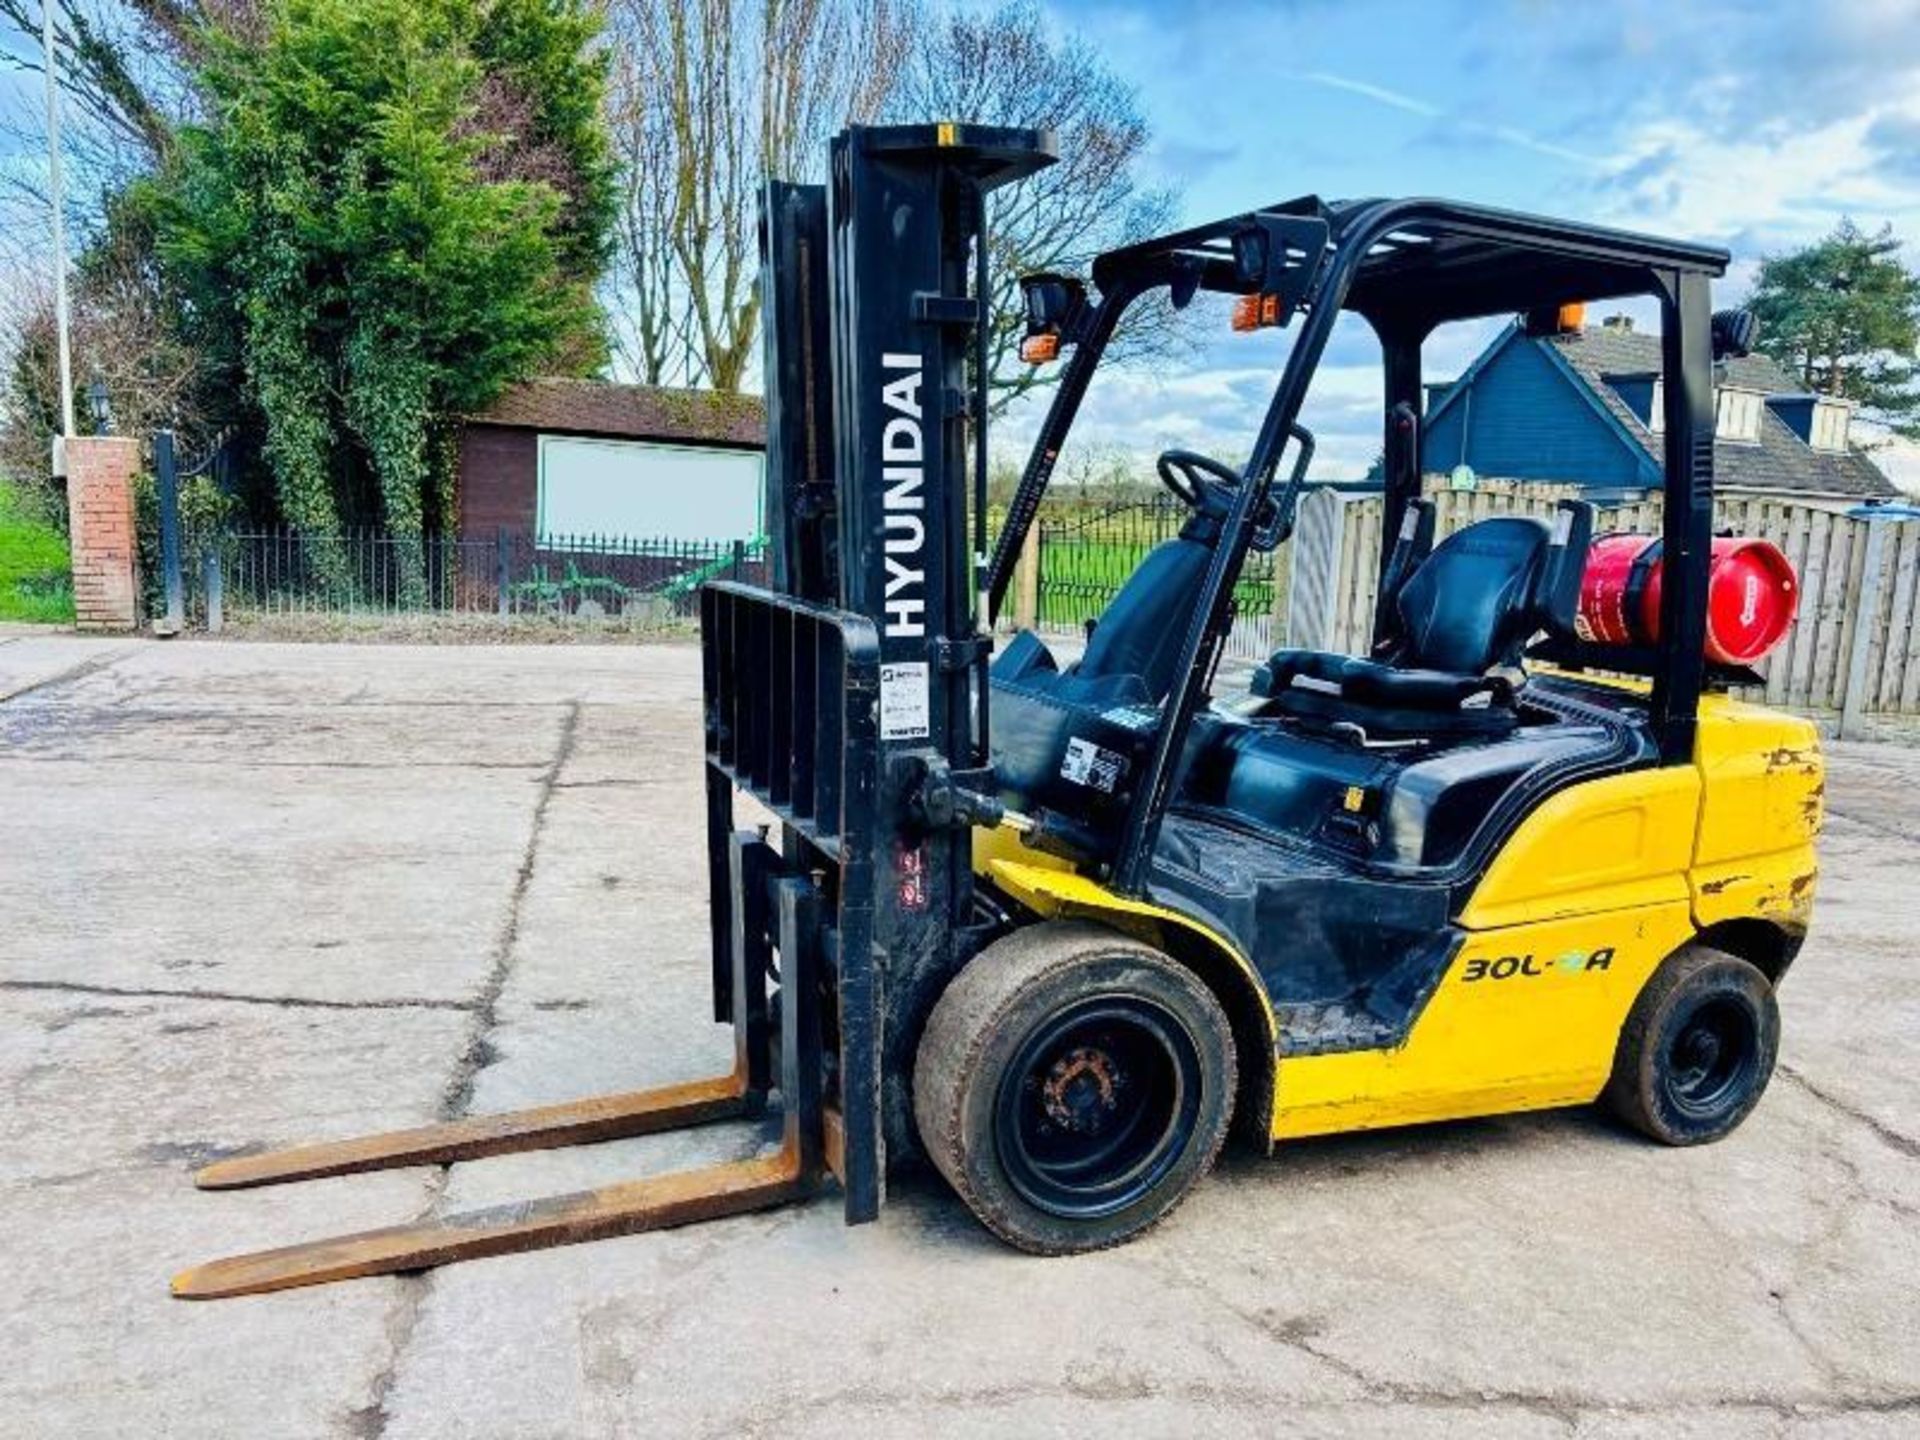 HYUNDAI 25L-9A CONTAINER SPEC FORKLIFT *YEAR 2017, 2956 HOURS* C/W SIDE SHIFT - Image 3 of 16